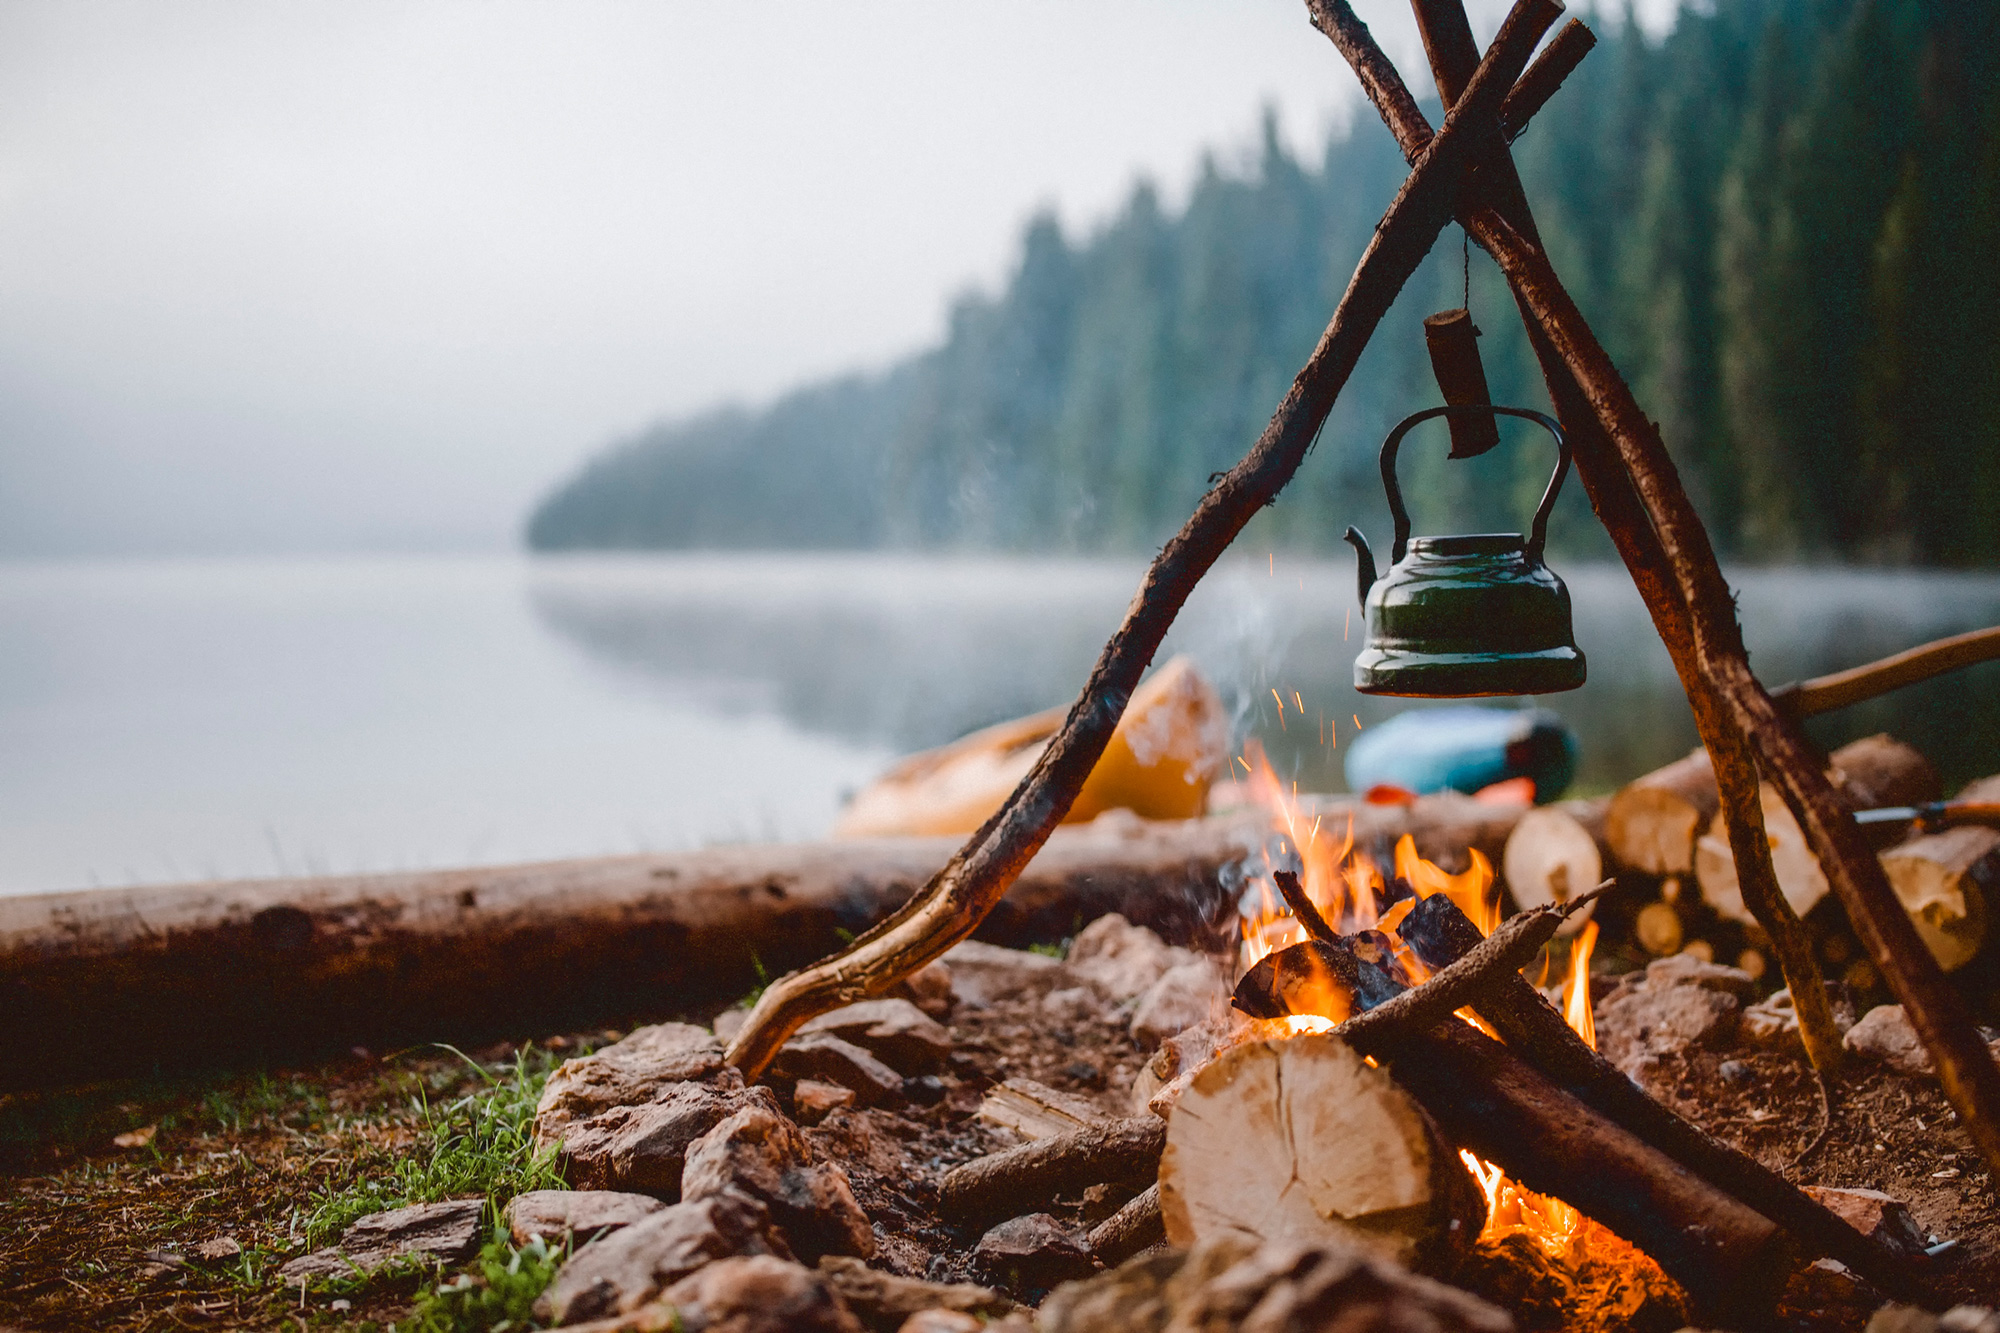 Spend a week camping off the grid